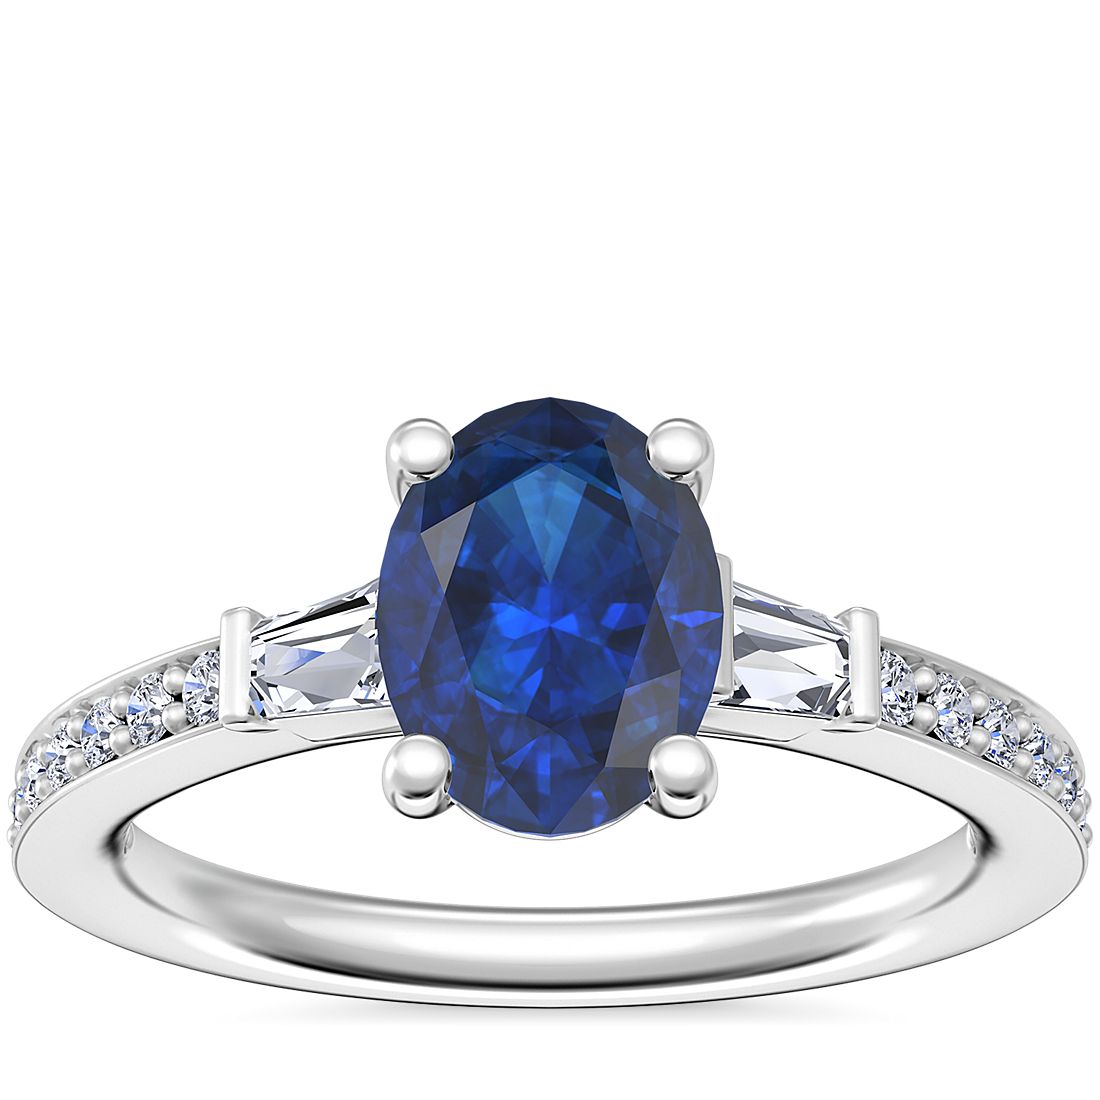 Tapered Baguette Diamond Cathedral Engagement Ring with Oval Sapphire in Platinum (8x6mm)